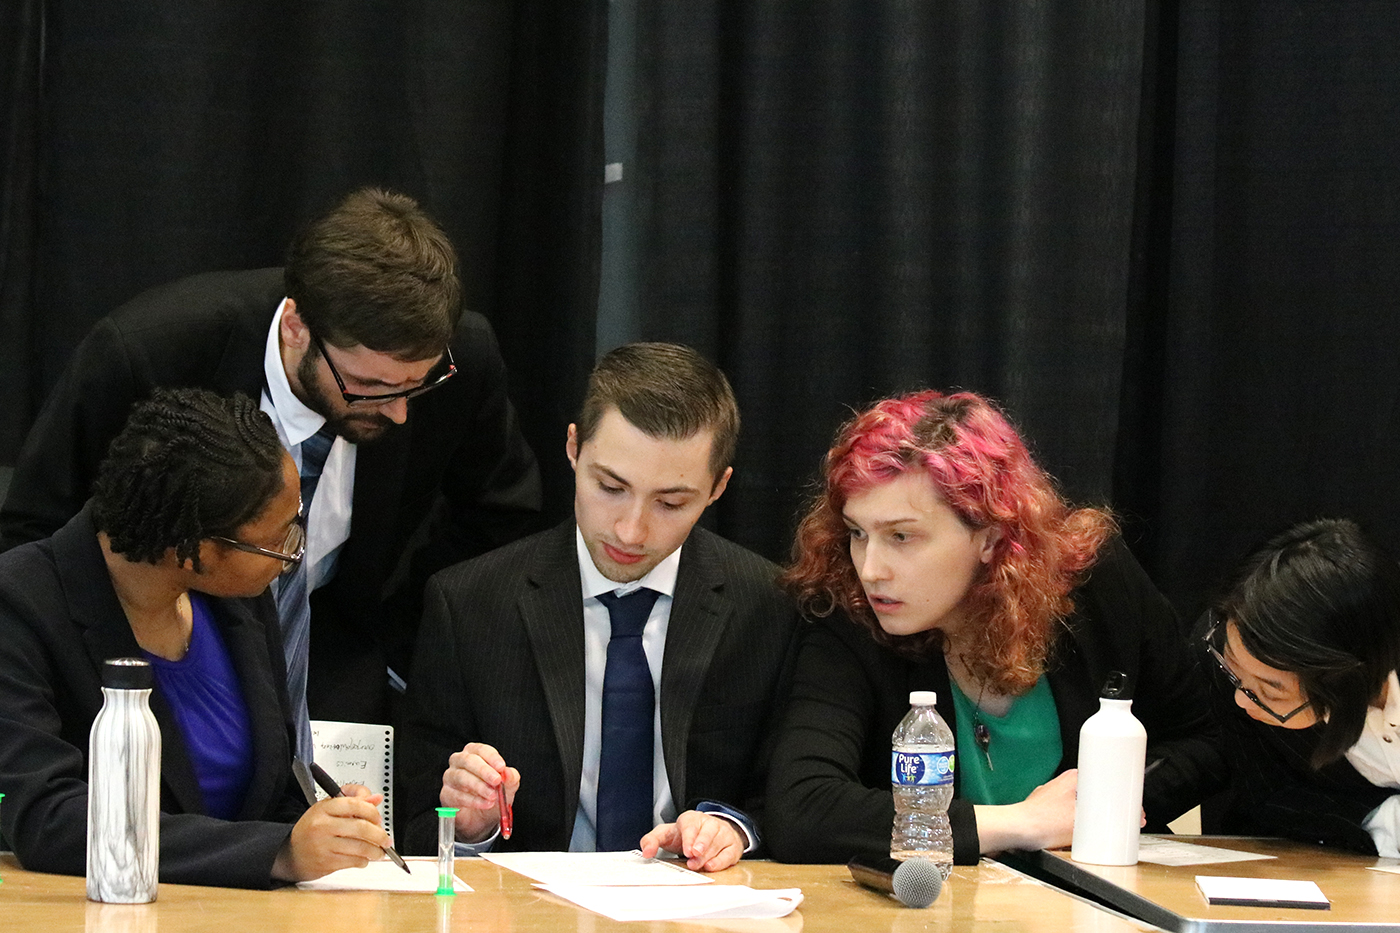 Students work on a paper together at an ethics competition.